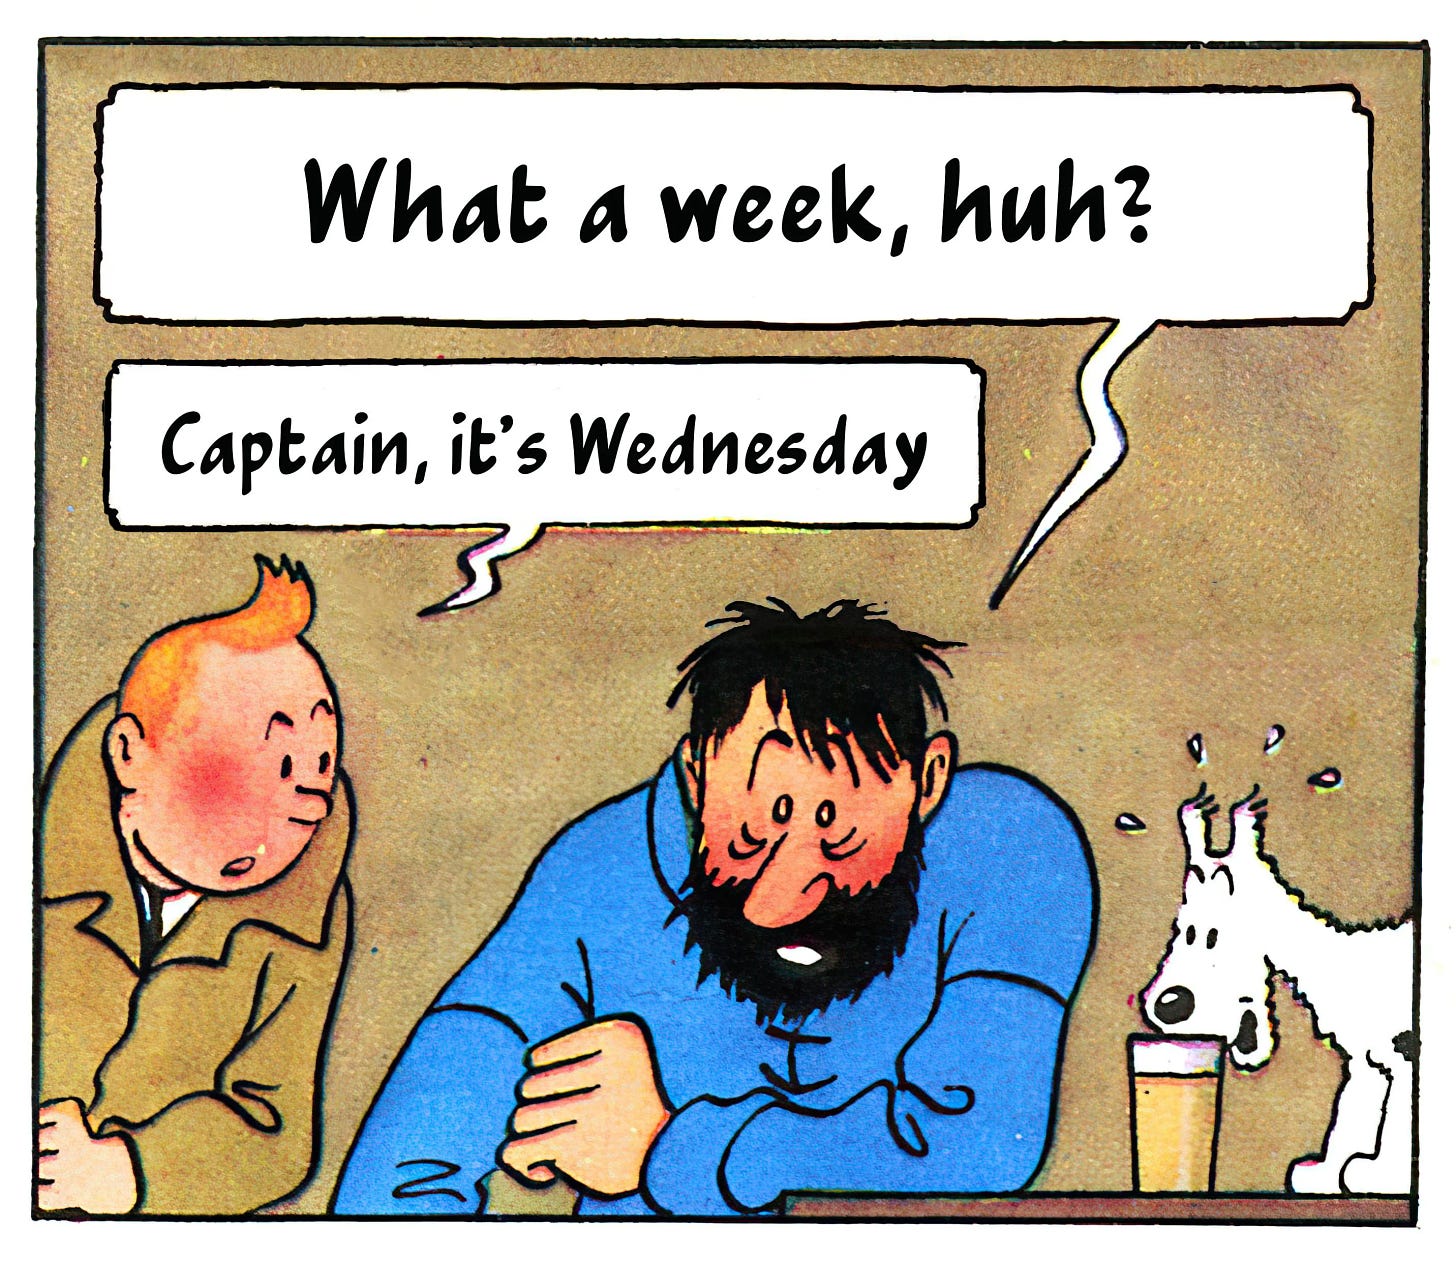 Comic panel from a TinTin comic. Captain Haddock looks dishevelled and says "What a week, huh?" to which Tin Tin responds: "Captain, it's Wednesday!"